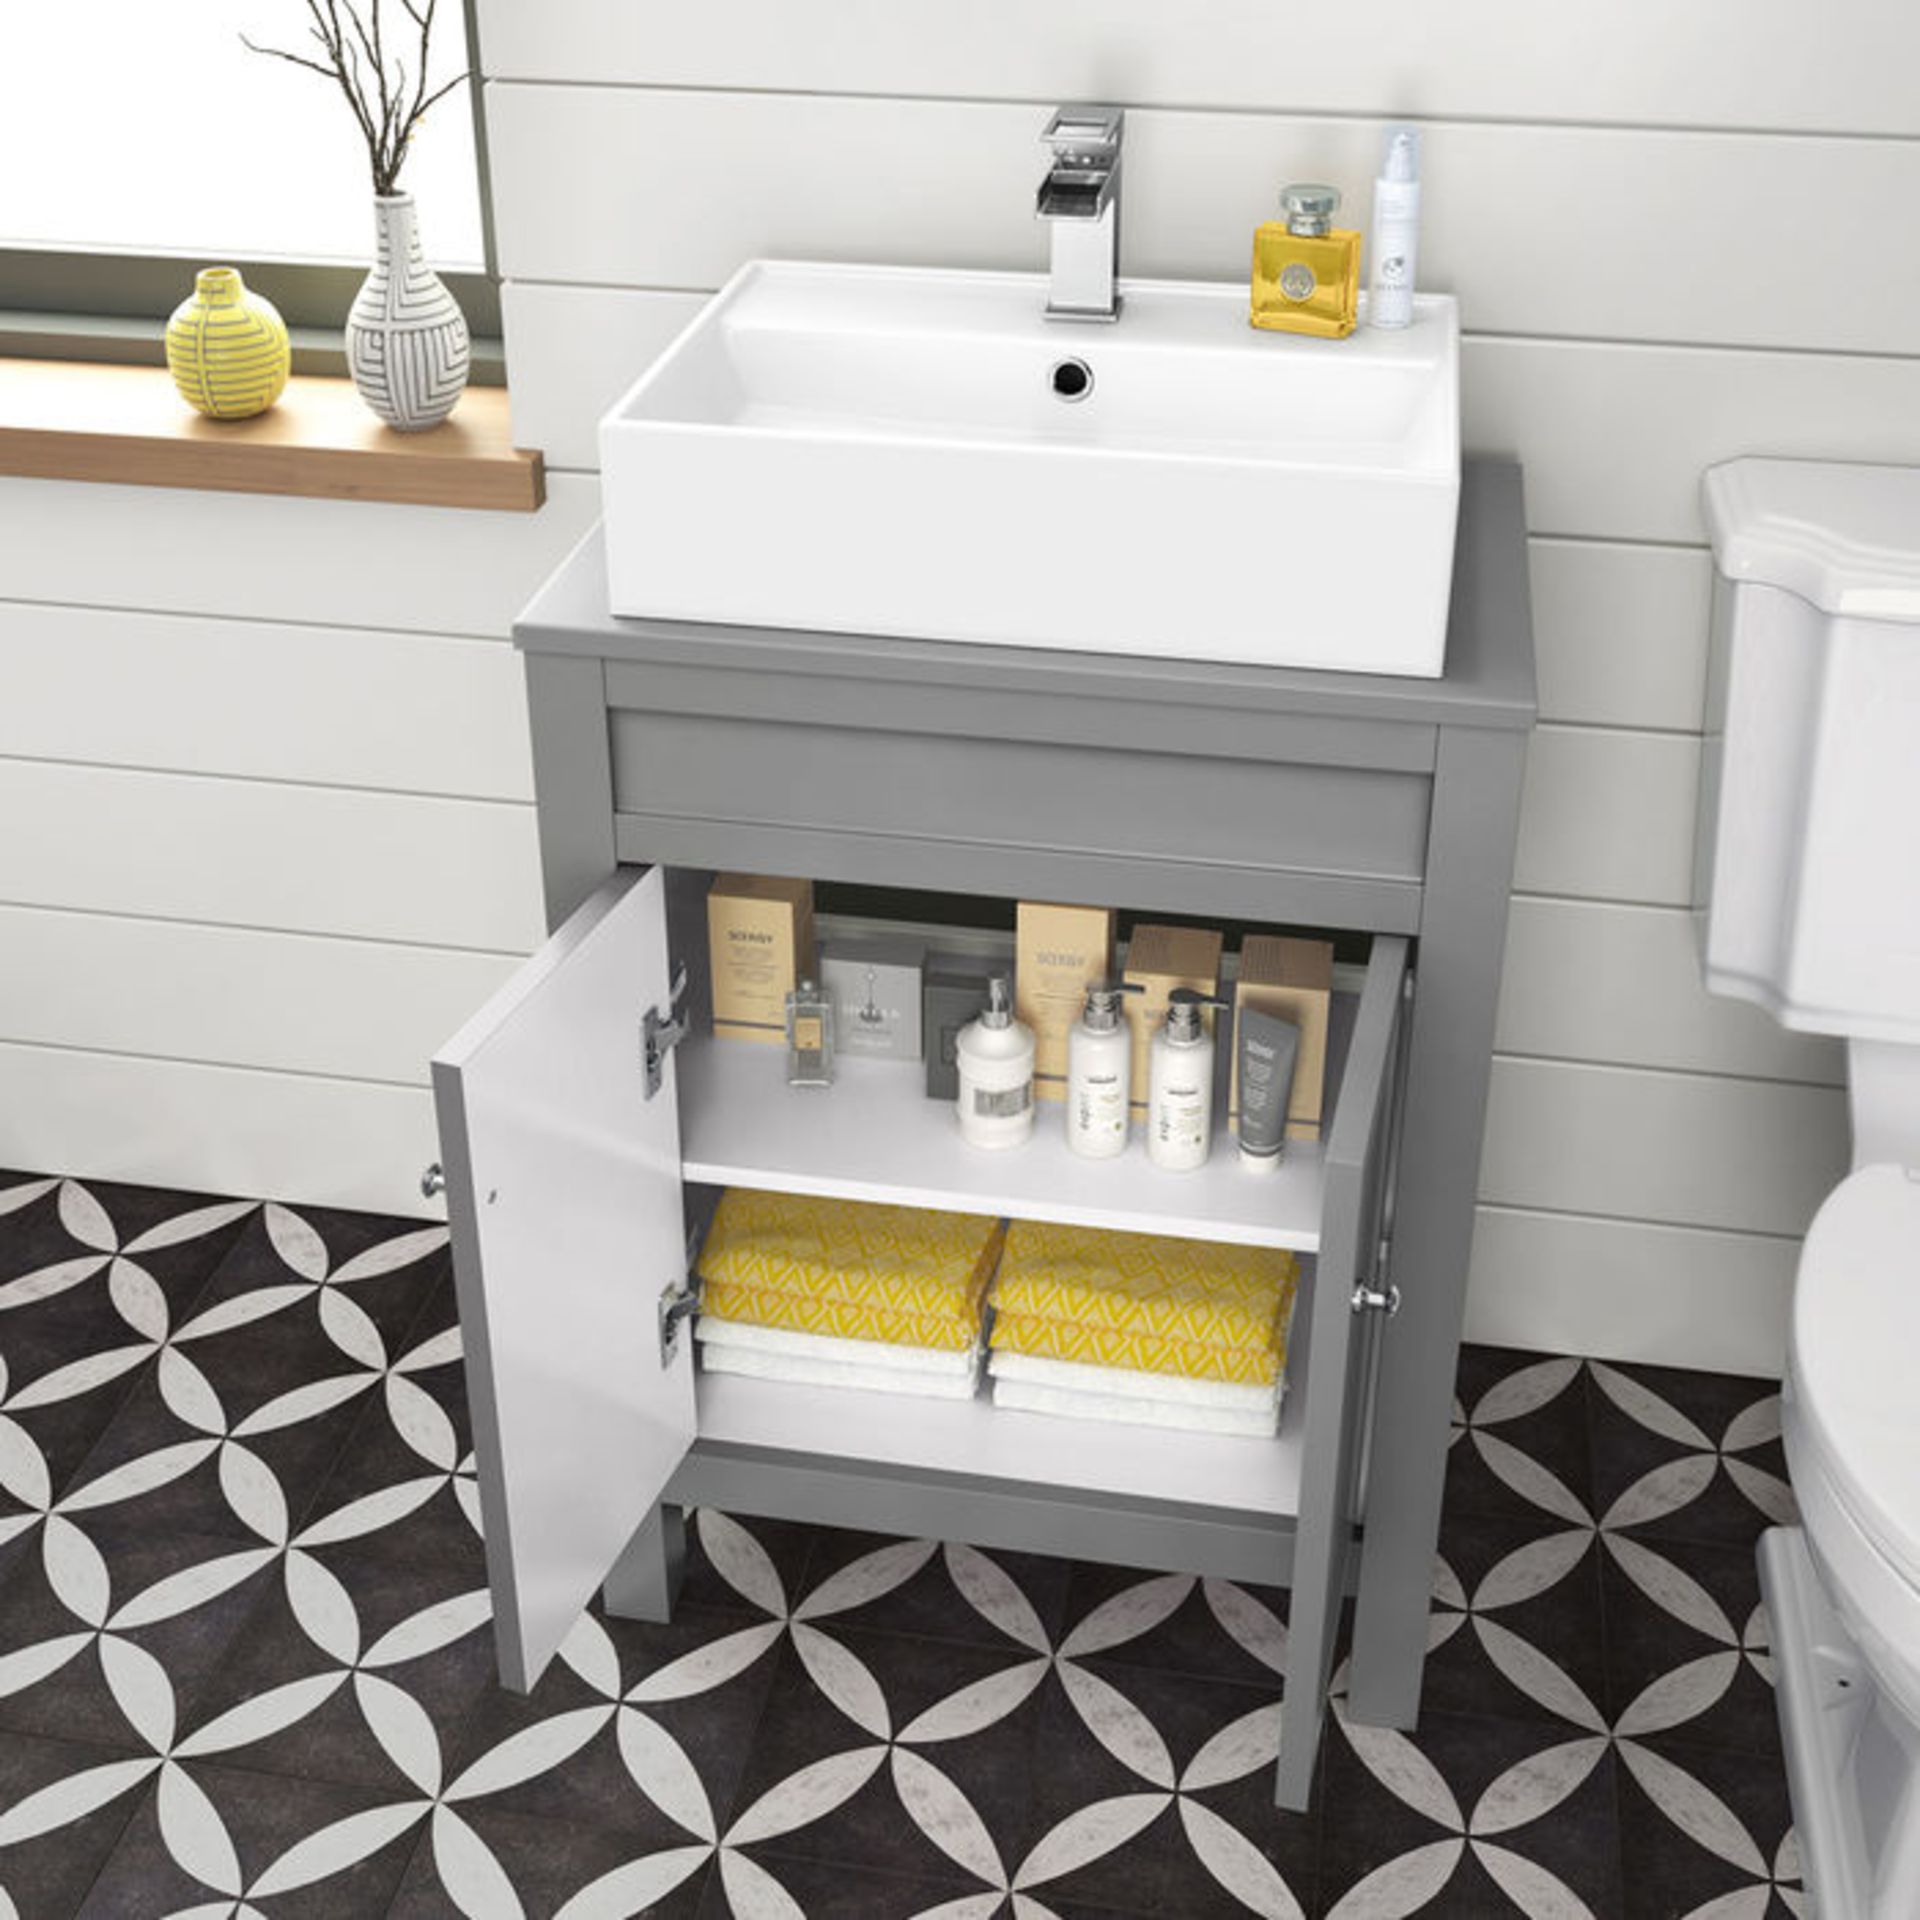 (KL72) 600mm Melbourne Grey Countertop Unit and Elisa Basin - Floor Standing. RRP £499.99. Comes - Image 2 of 4